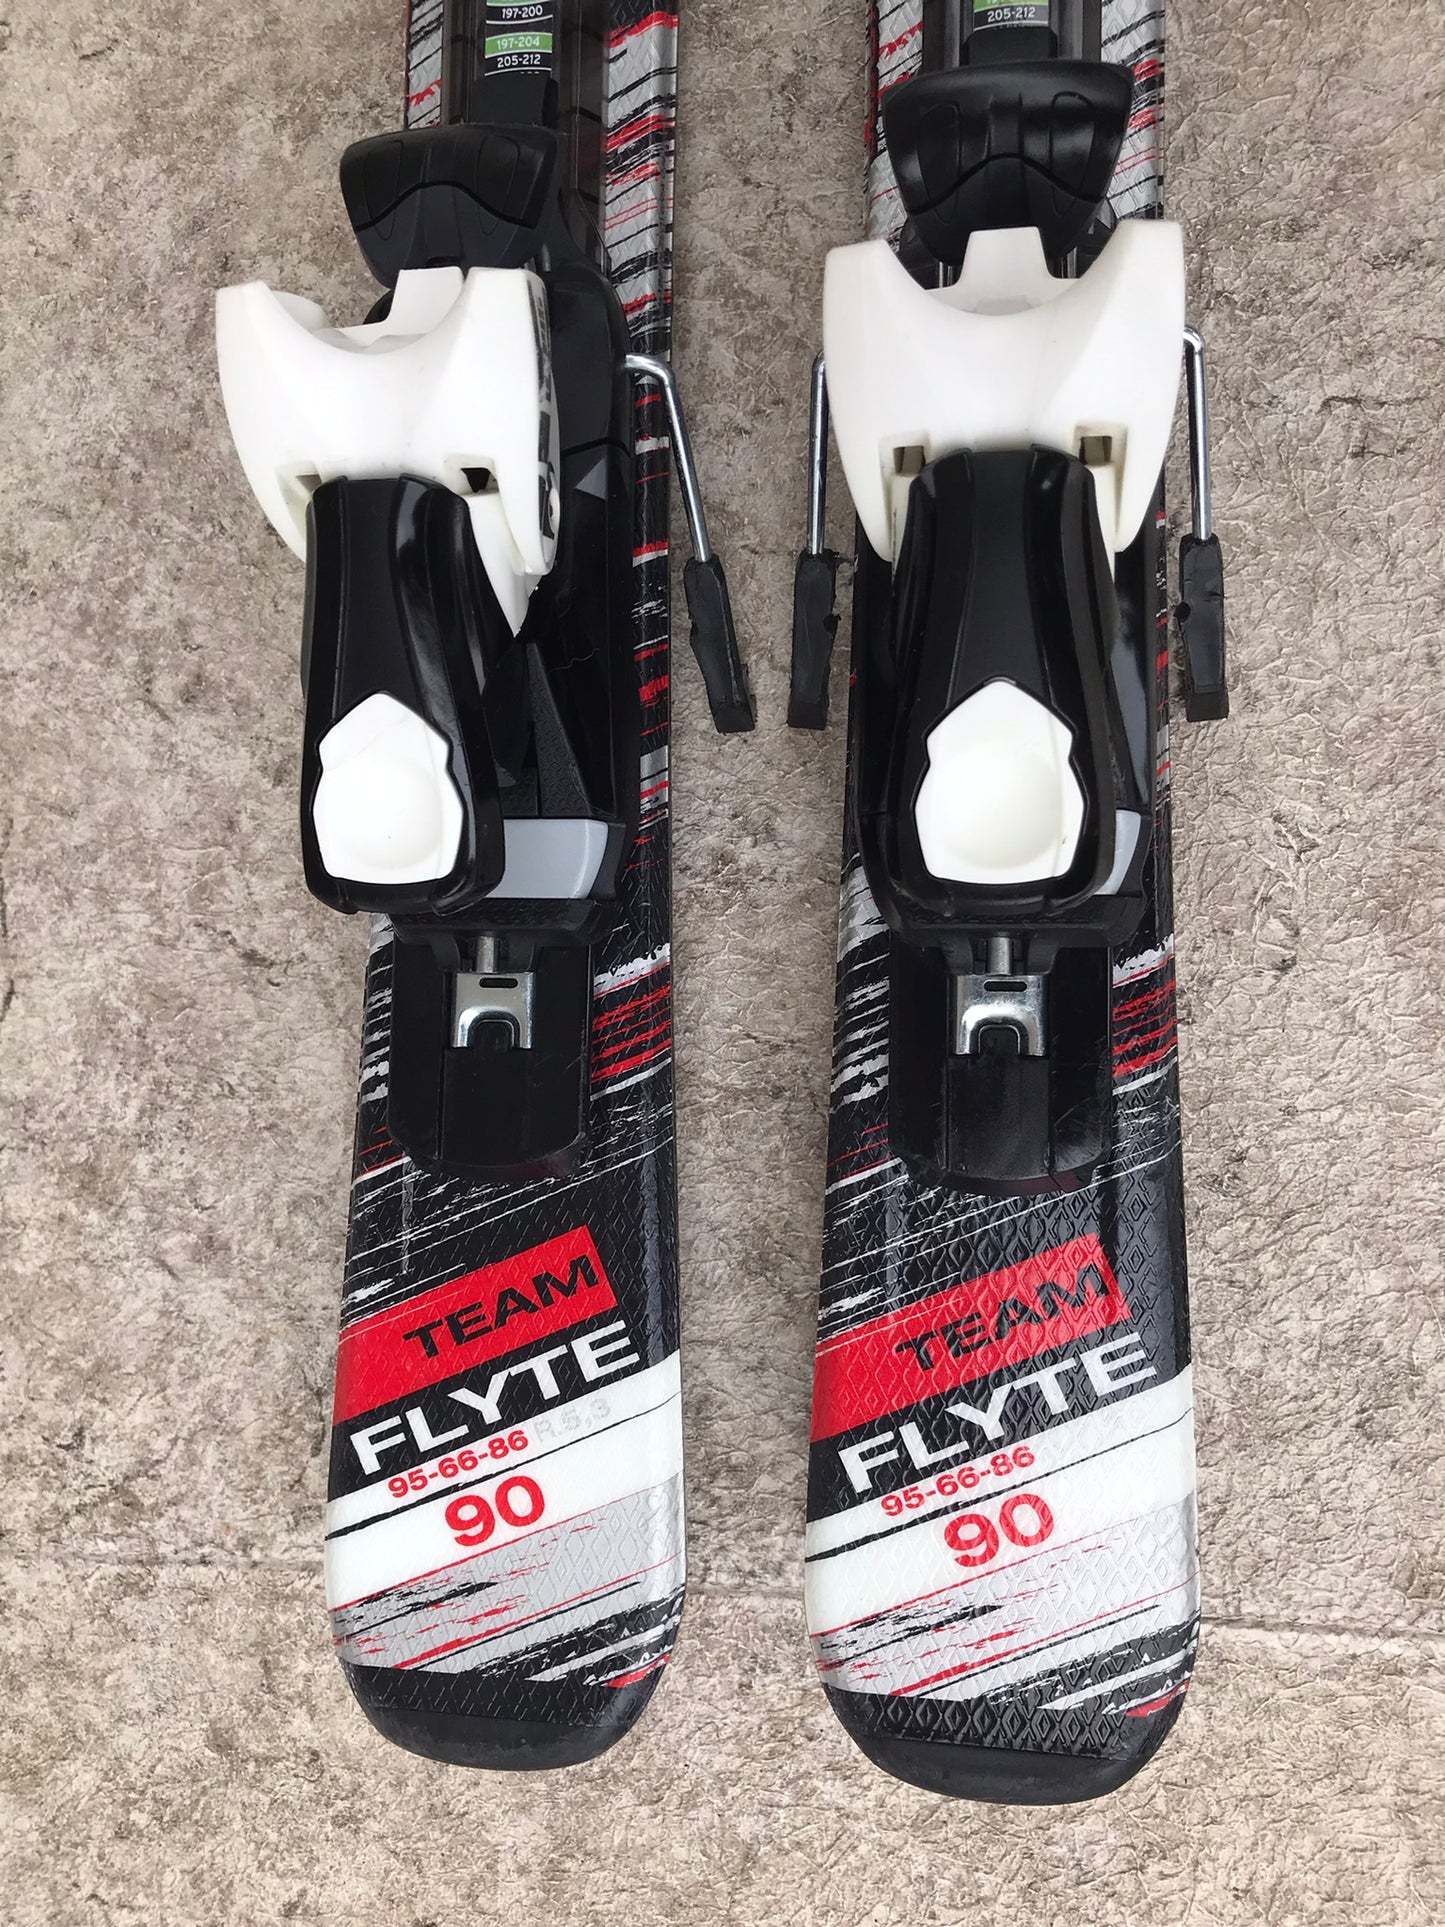 Ski 090 Tecno Pro Flyte Parabolic Black White Red With Bindings Excellent